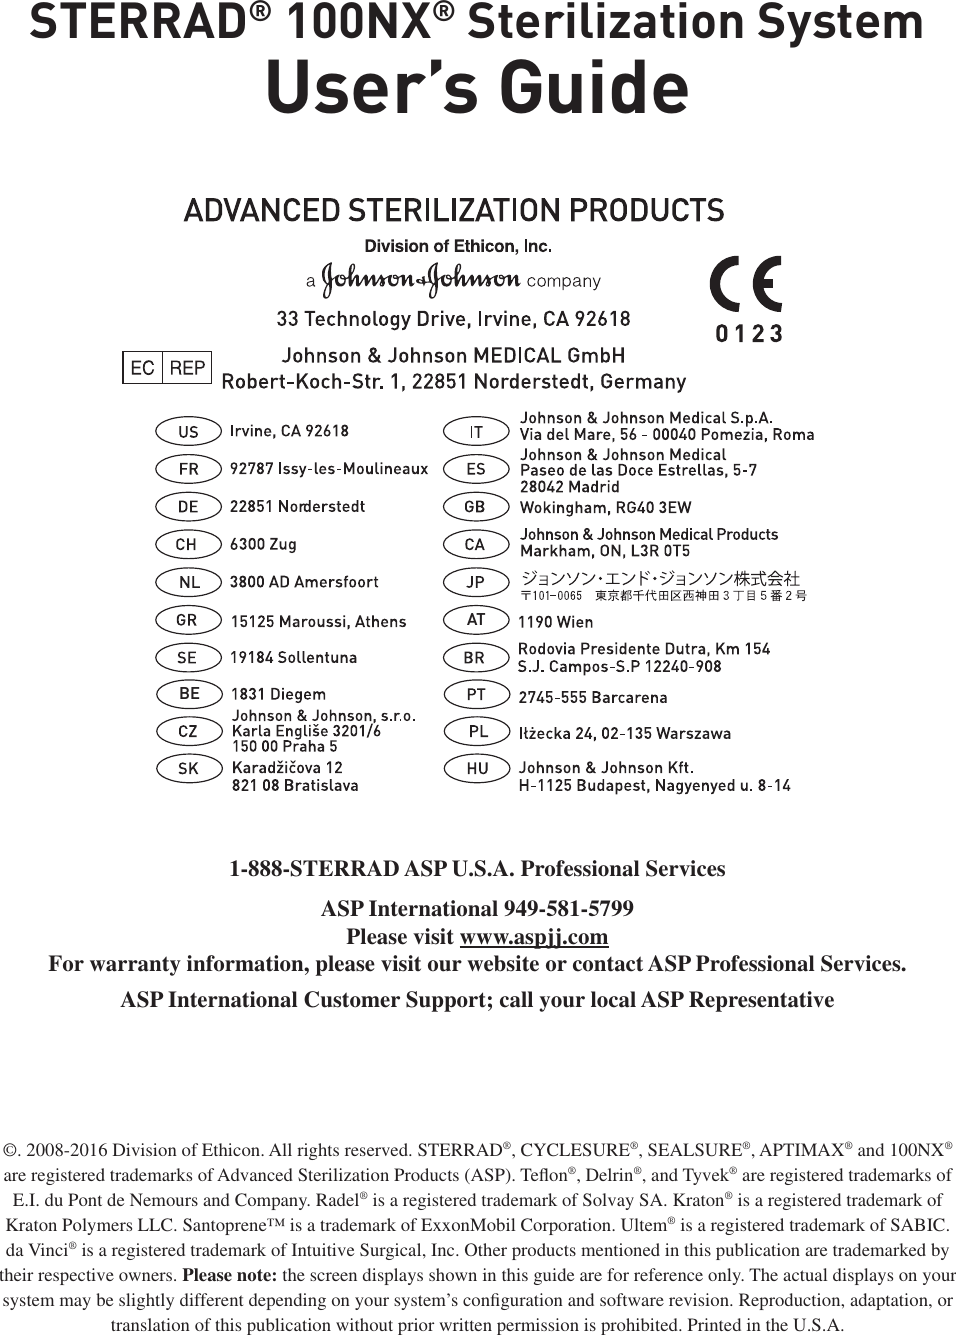 STERRAD® 100NX® Sterilization SystemUser’s Guide1-888-STERRAD ASP U.S.A. Professional ServicesASP International 949-581-5799Please visit www.aspjj.comFor warranty information, please visit our website or contact ASP Professional Services.ASP International Customer Support; call your local ASP Representative©. 2008-2016 Division of Ethicon. All rights reserved. STERRAD®, CYCLESURE®, SEALSURE®, APTIMAX® and 100NX® are registered trademarks of Advanced Sterilization Products (ASP). Teﬂ on®, Delrin®, and Tyvek® are registered trademarks of E.I. du Pont de Nemours and Company. Radel® is a registered trademark of Solvay SA. Kraton® is a registered trademark of Kraton Polymers LLC. Santoprene™ is a trademark of ExxonMobil Corporation. Ultem® is a registered trademark of SABIC. da Vinci® is a registered trademark of Intuitive Surgical, Inc. Other products mentioned in this publication are trademarked by their respective owners. Please note: the screen displays shown in this guide are for reference only. The actual displays on your system may be slightly different depending on your system’s conﬁ guration and software revision. Reproduction, adaptation, or translation of this publication without prior written permission is prohibited. Printed in the U.S.A.  BEAT